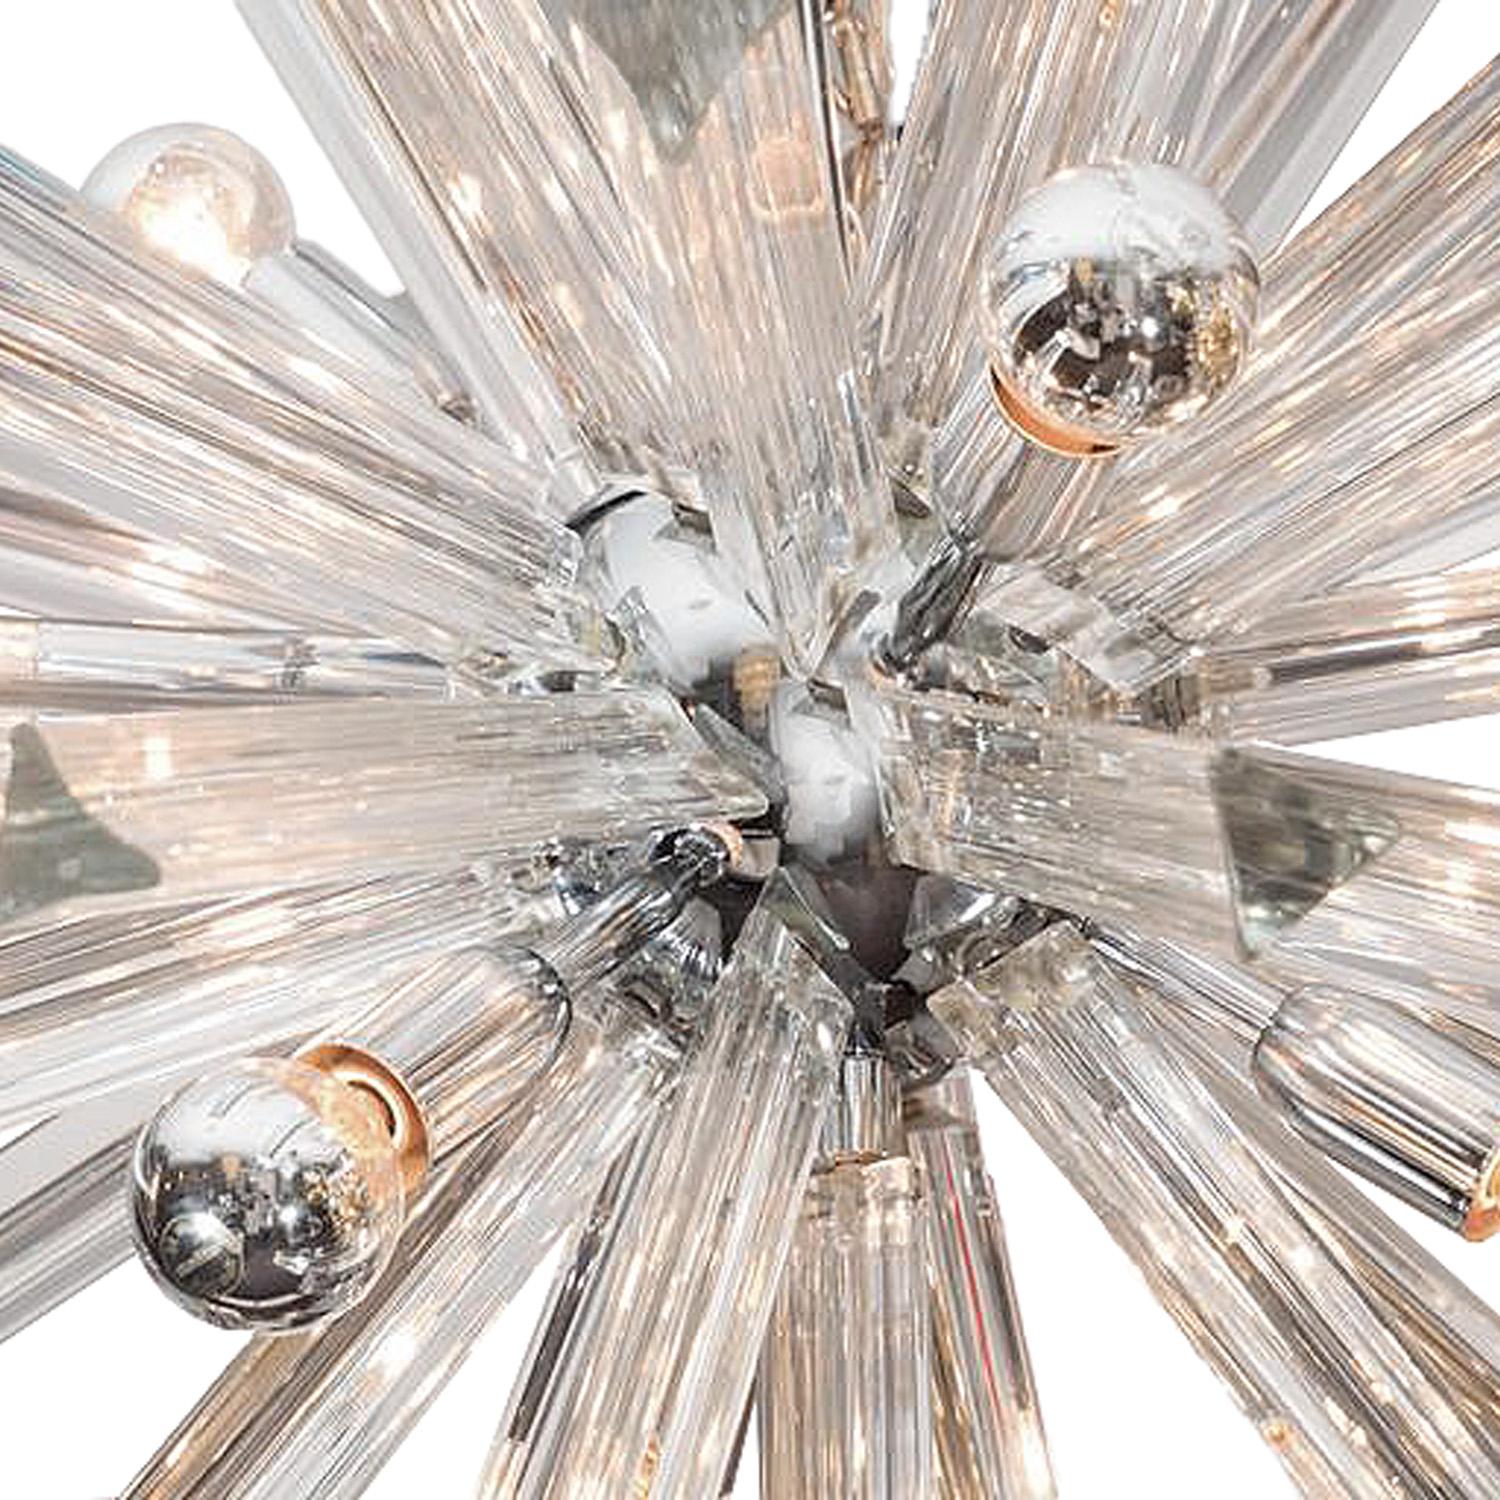 Triadri crystal rod sputnik-style chandelier in chrome. Italy 2017. This is a very chic fixture.

Customization of dimensions and finish available. Lead time 5-6 weeks.